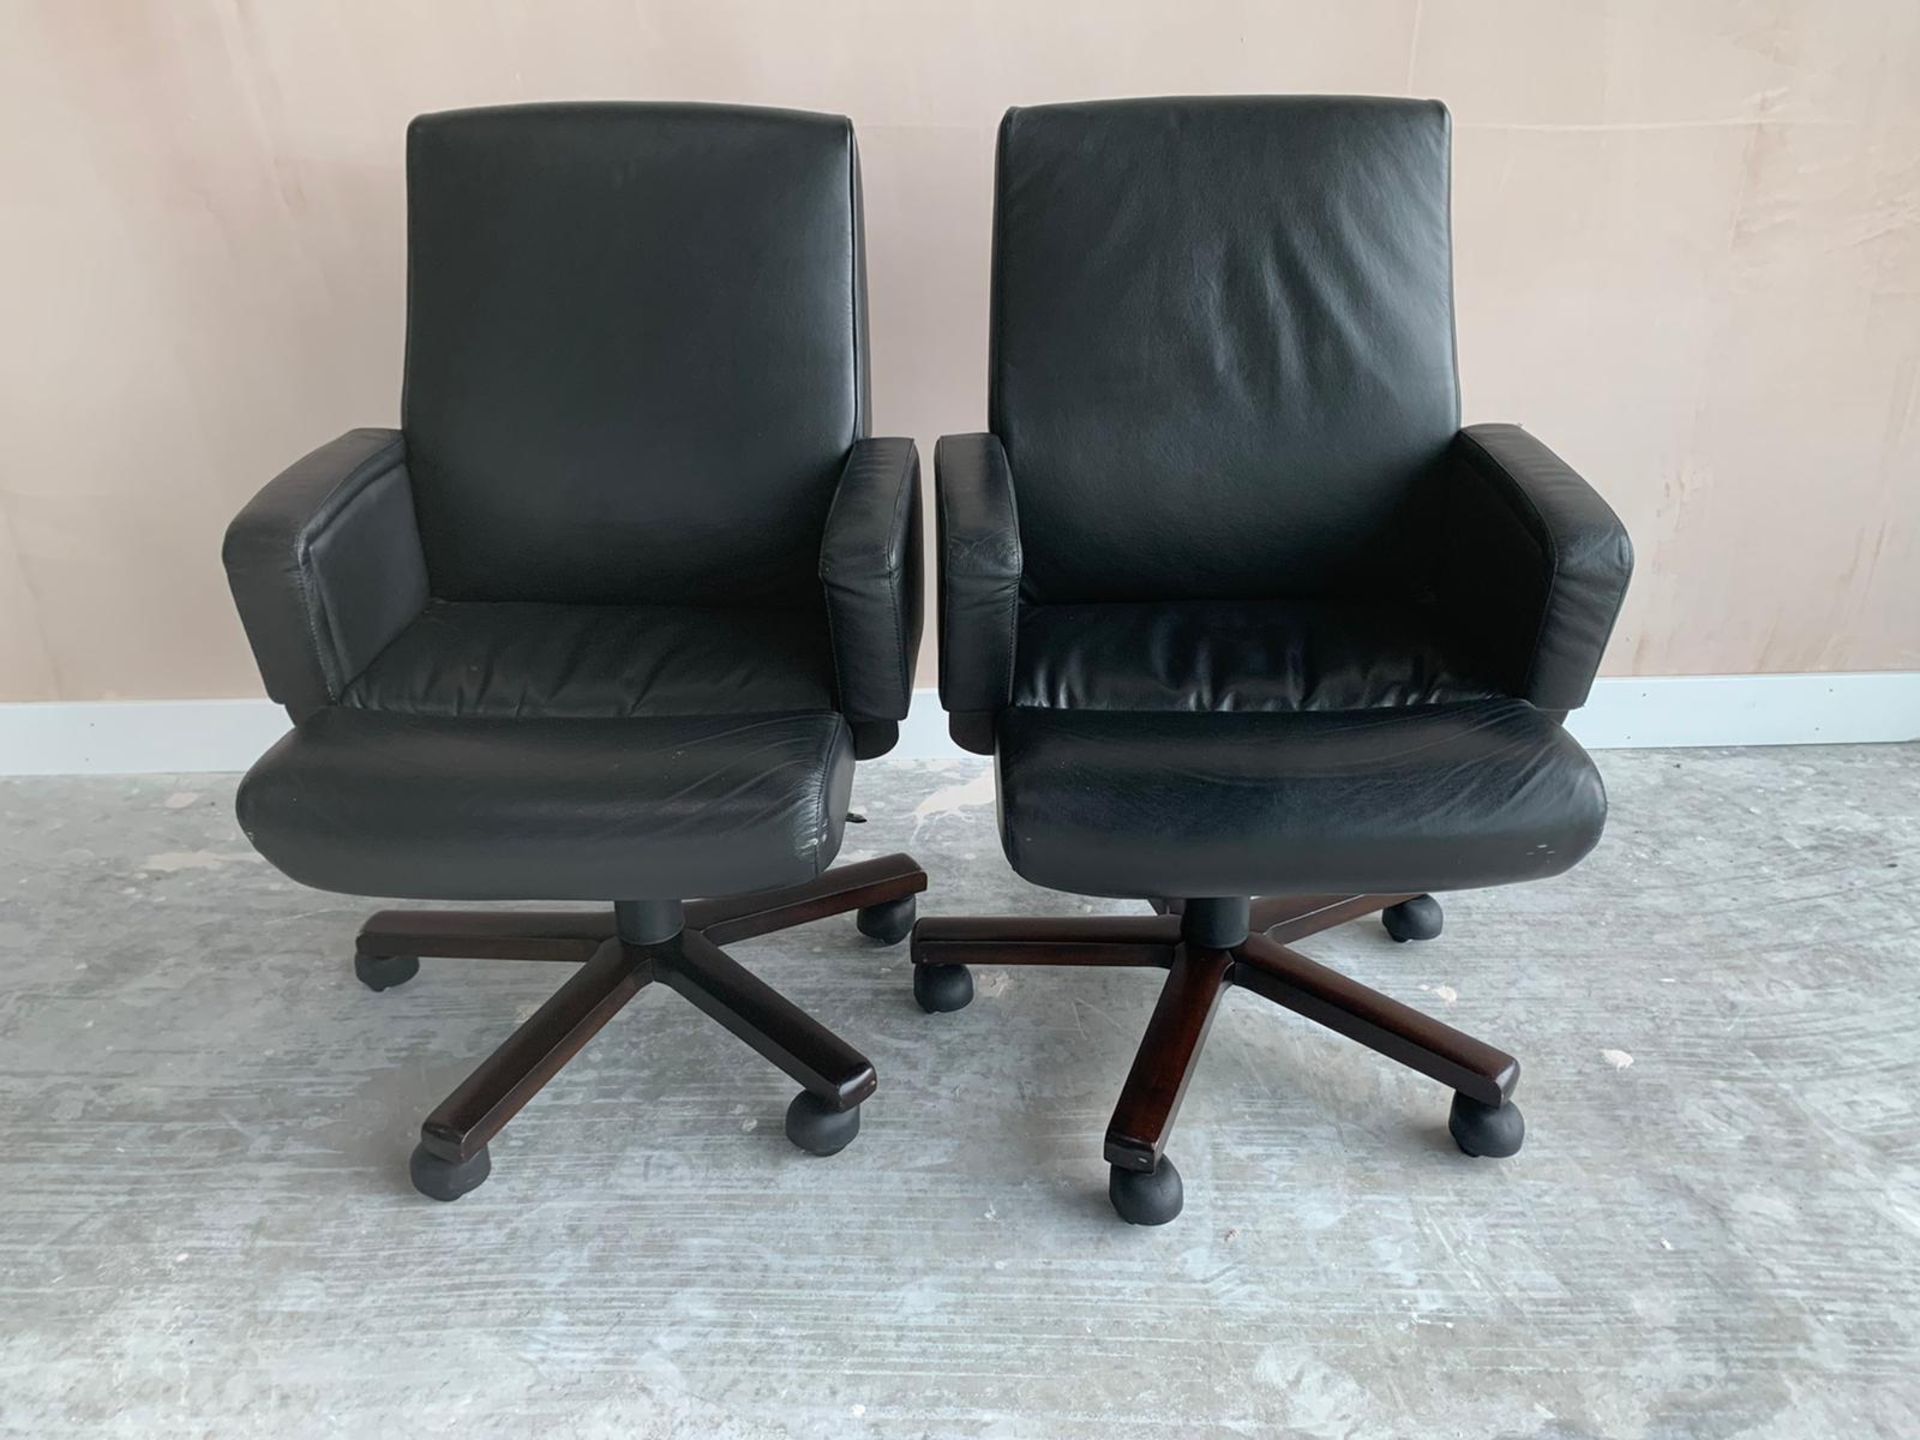 Black Leather Commercial Grade Swivel Office Chair x2 - Image 2 of 5